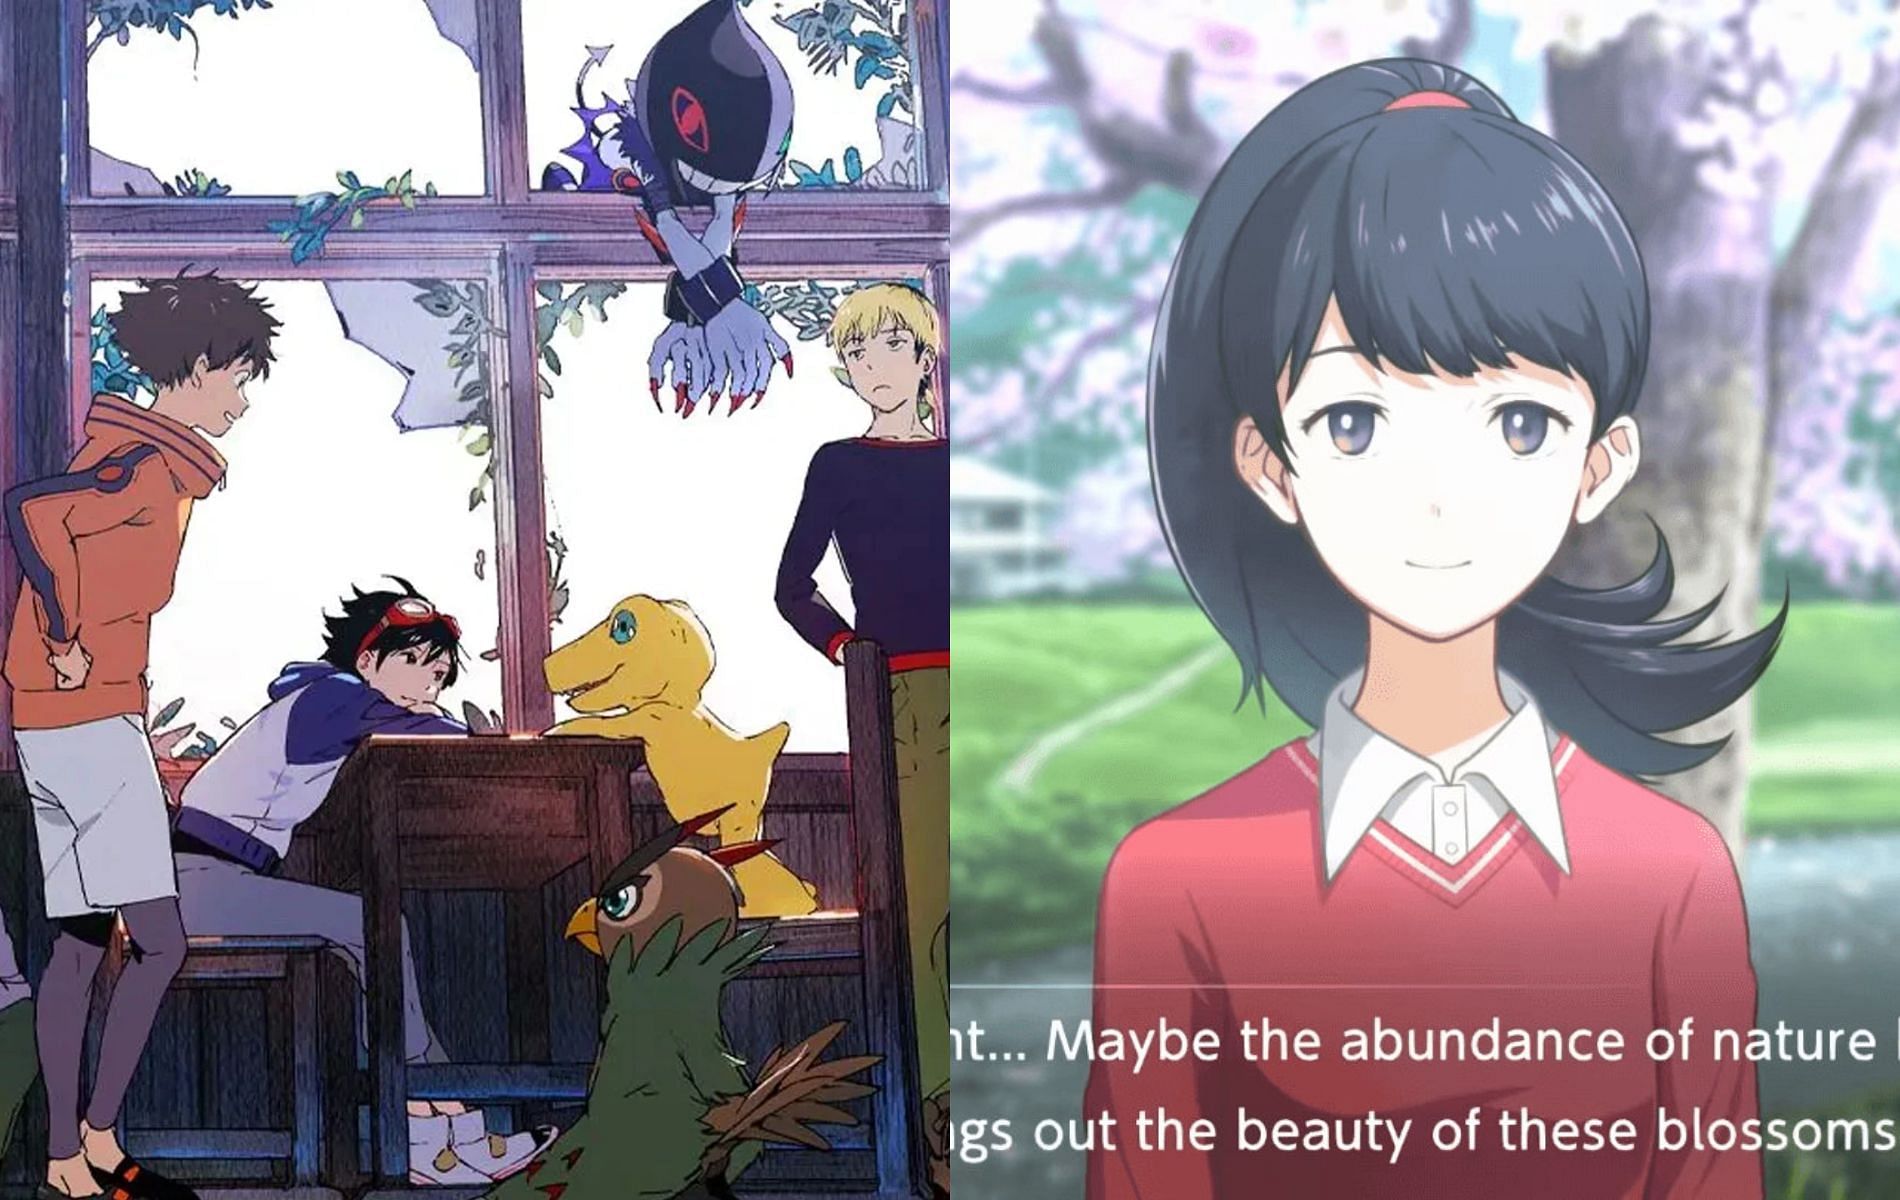 Take a breather and live the moment with fellow NPCs in Digimon Survive (Images via Bandai Namco)